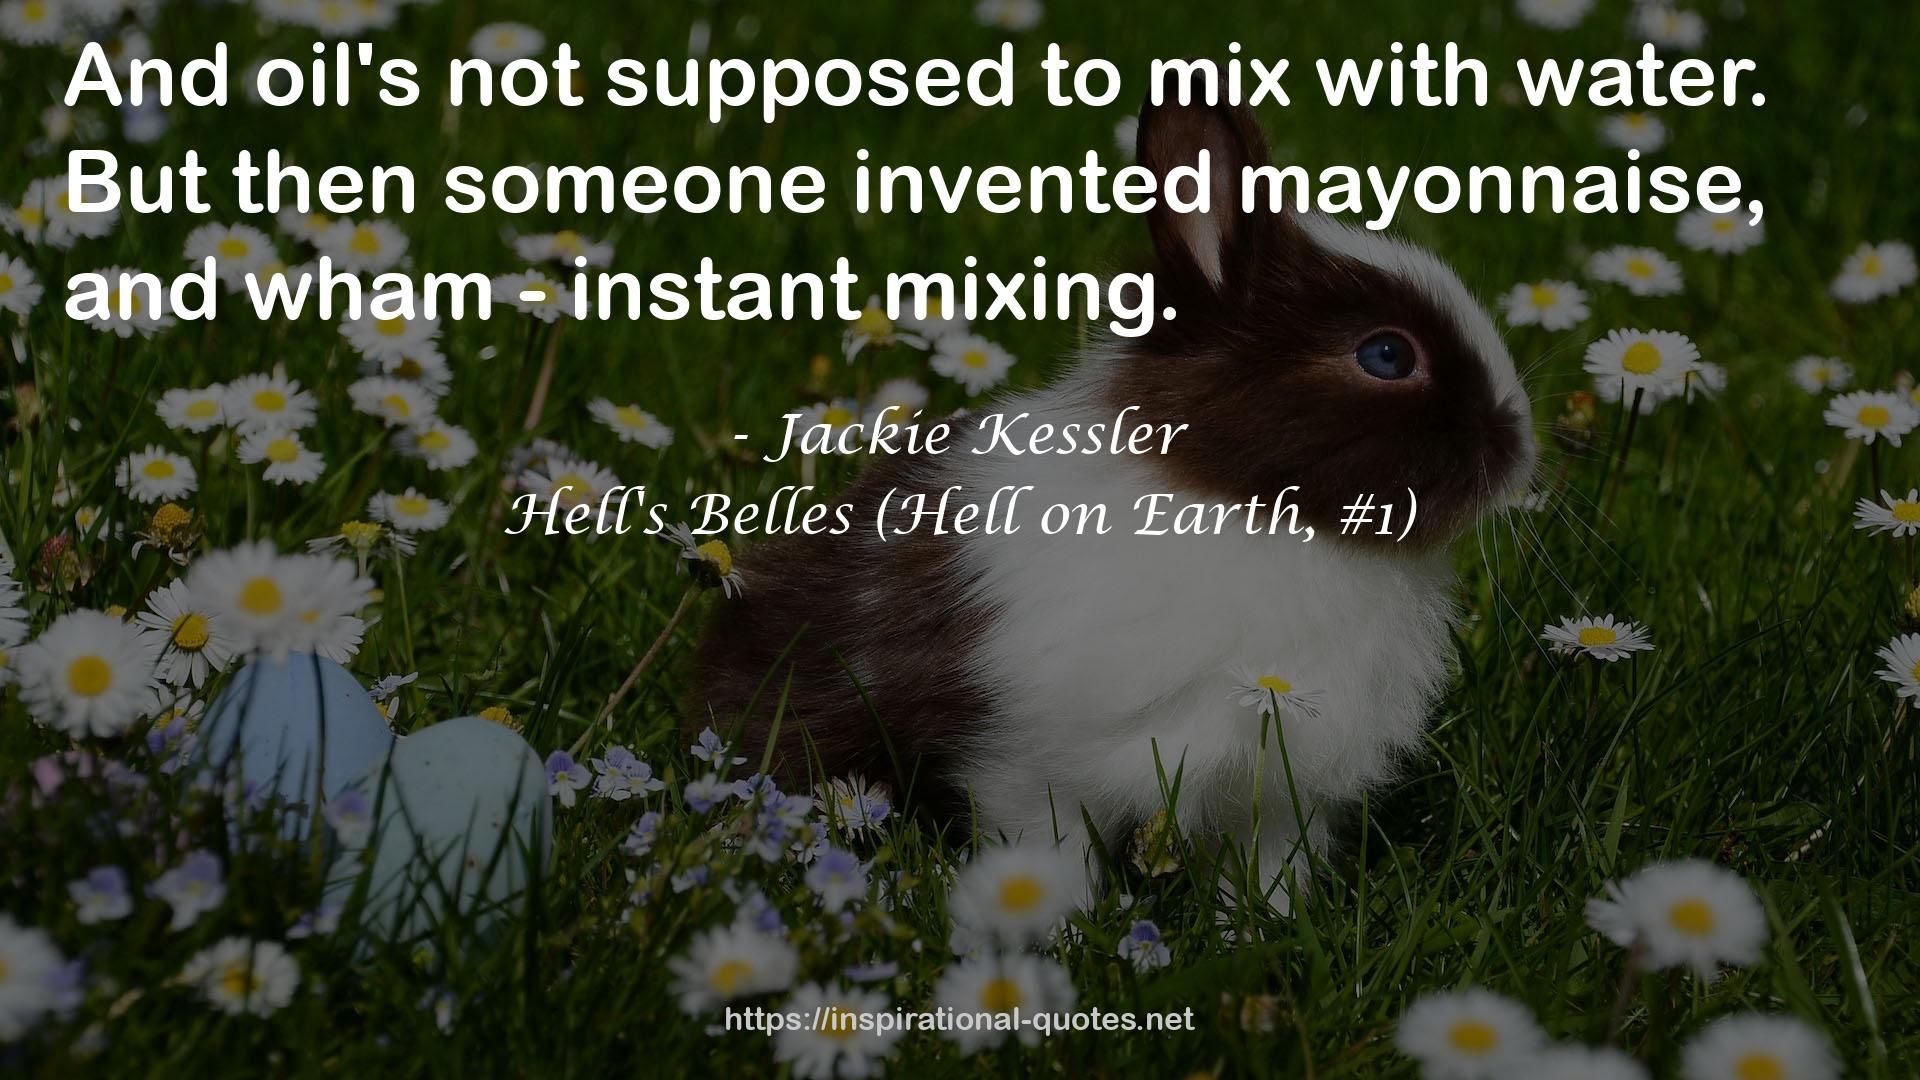 Hell's Belles (Hell on Earth, #1) QUOTES